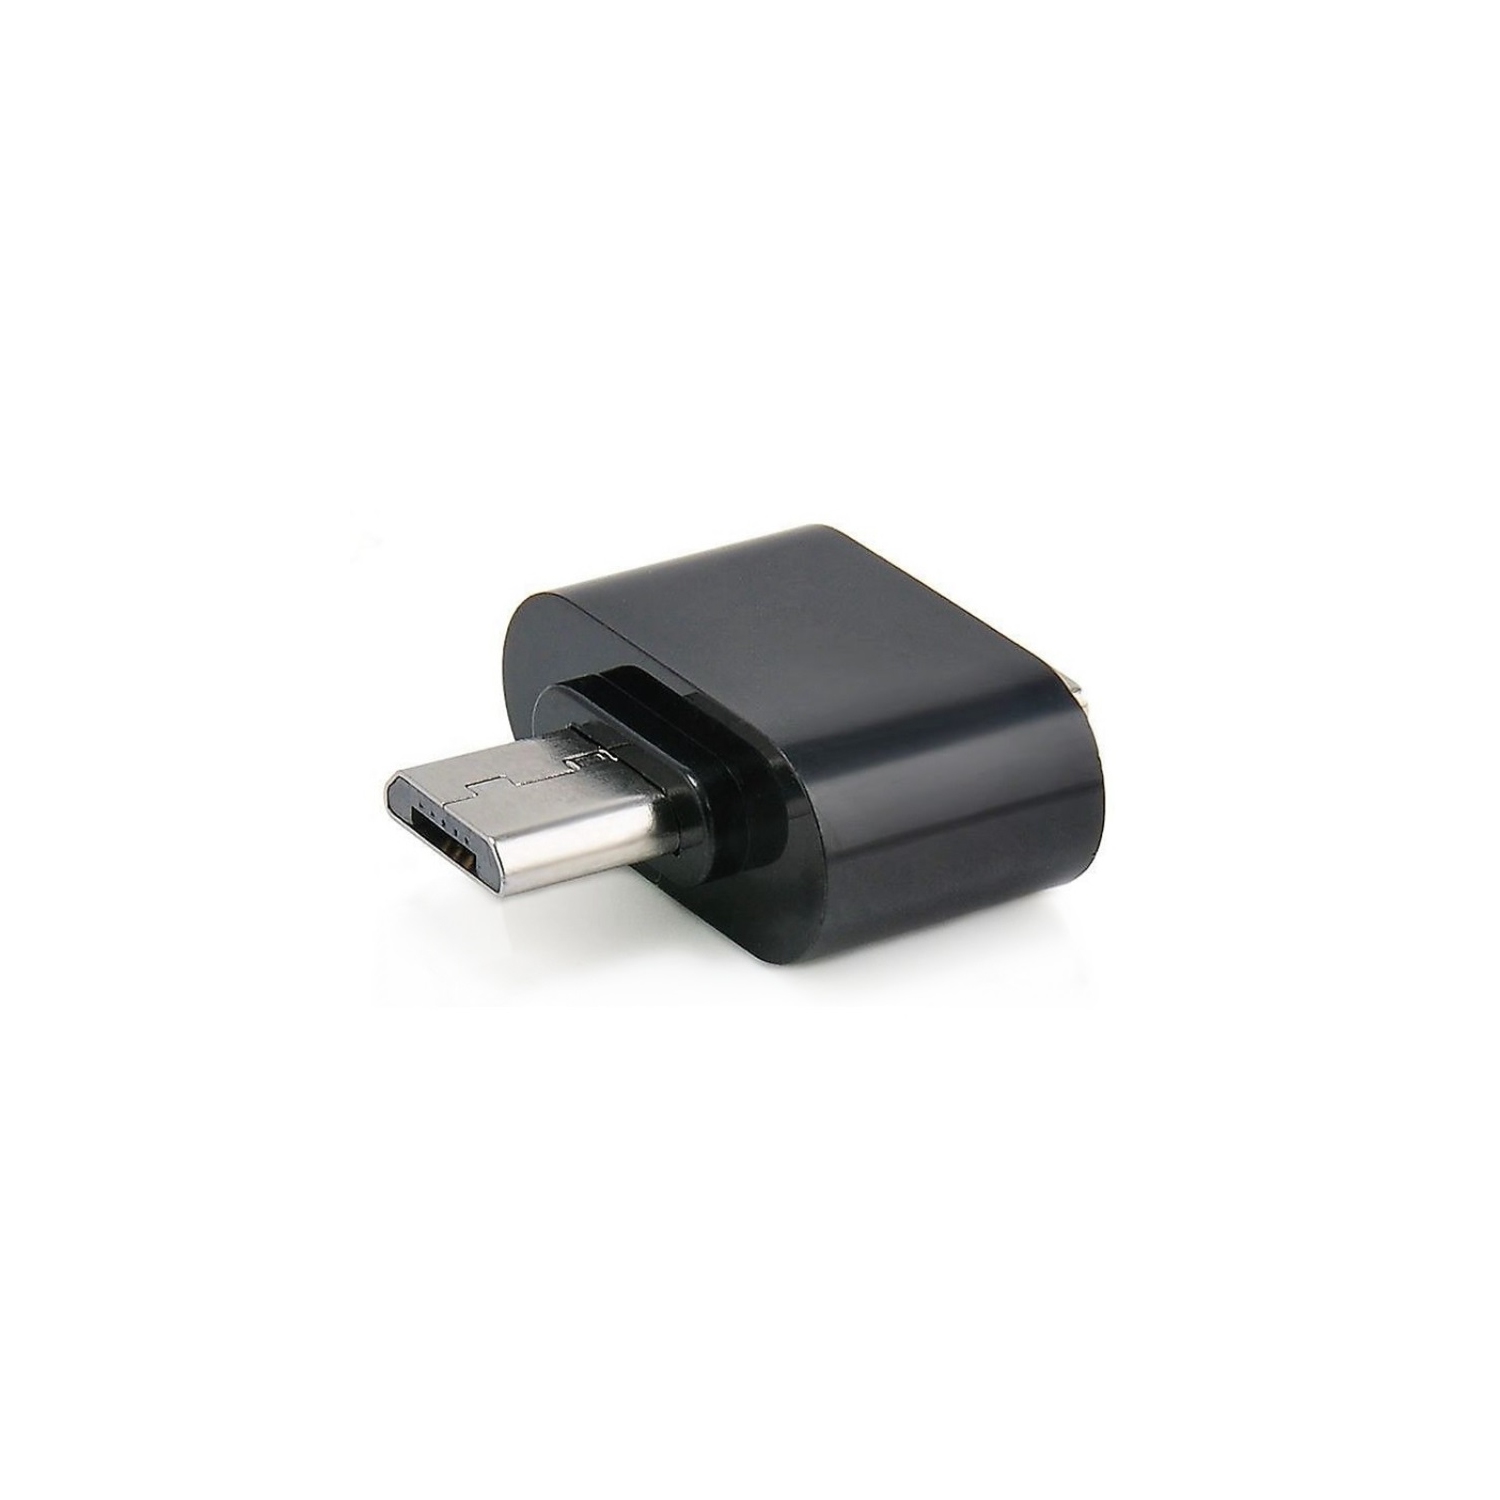 Micro USB to USB OTG Adapter Converter for Android Tablet / Samsung / Sony / HTC, Black